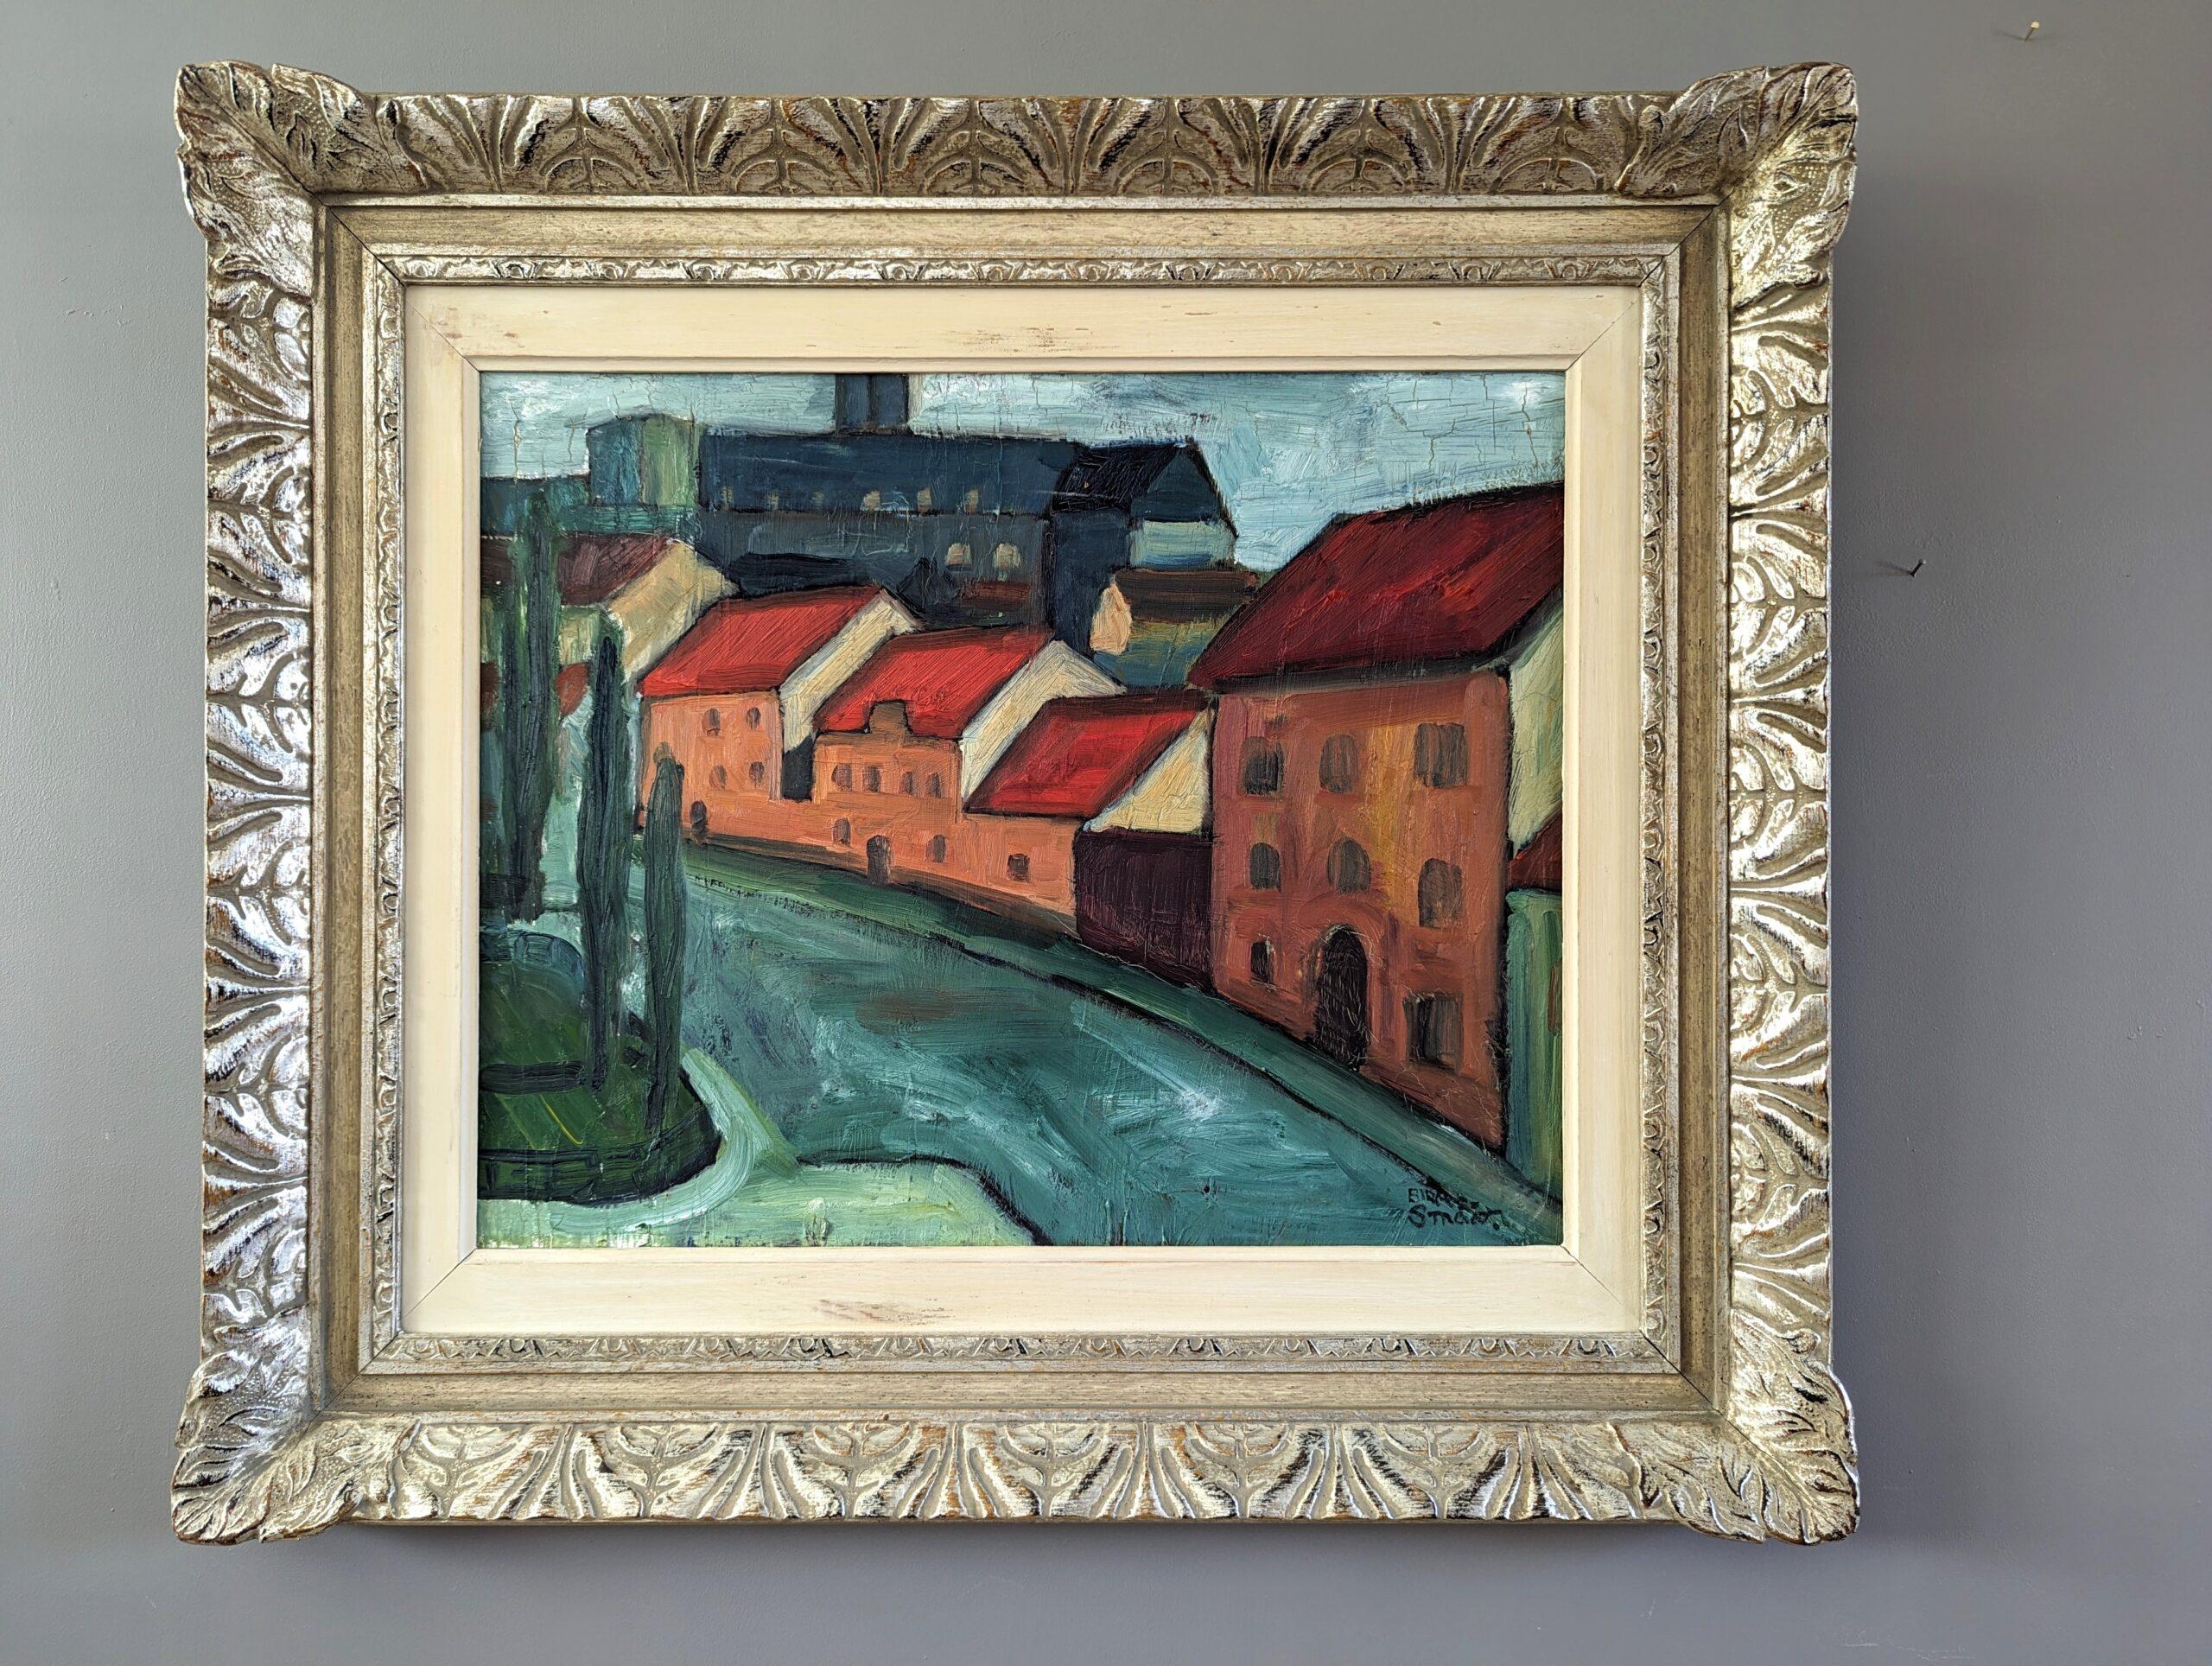 STRETCH OF HOUSES
Size: 60 x 68 cm (including frame)
Oil on Board

A very charming modernist style mid-century street scene composition, executed in oil onto board.

The painting presents a lively neighbourhood lined with a stretch of houses of